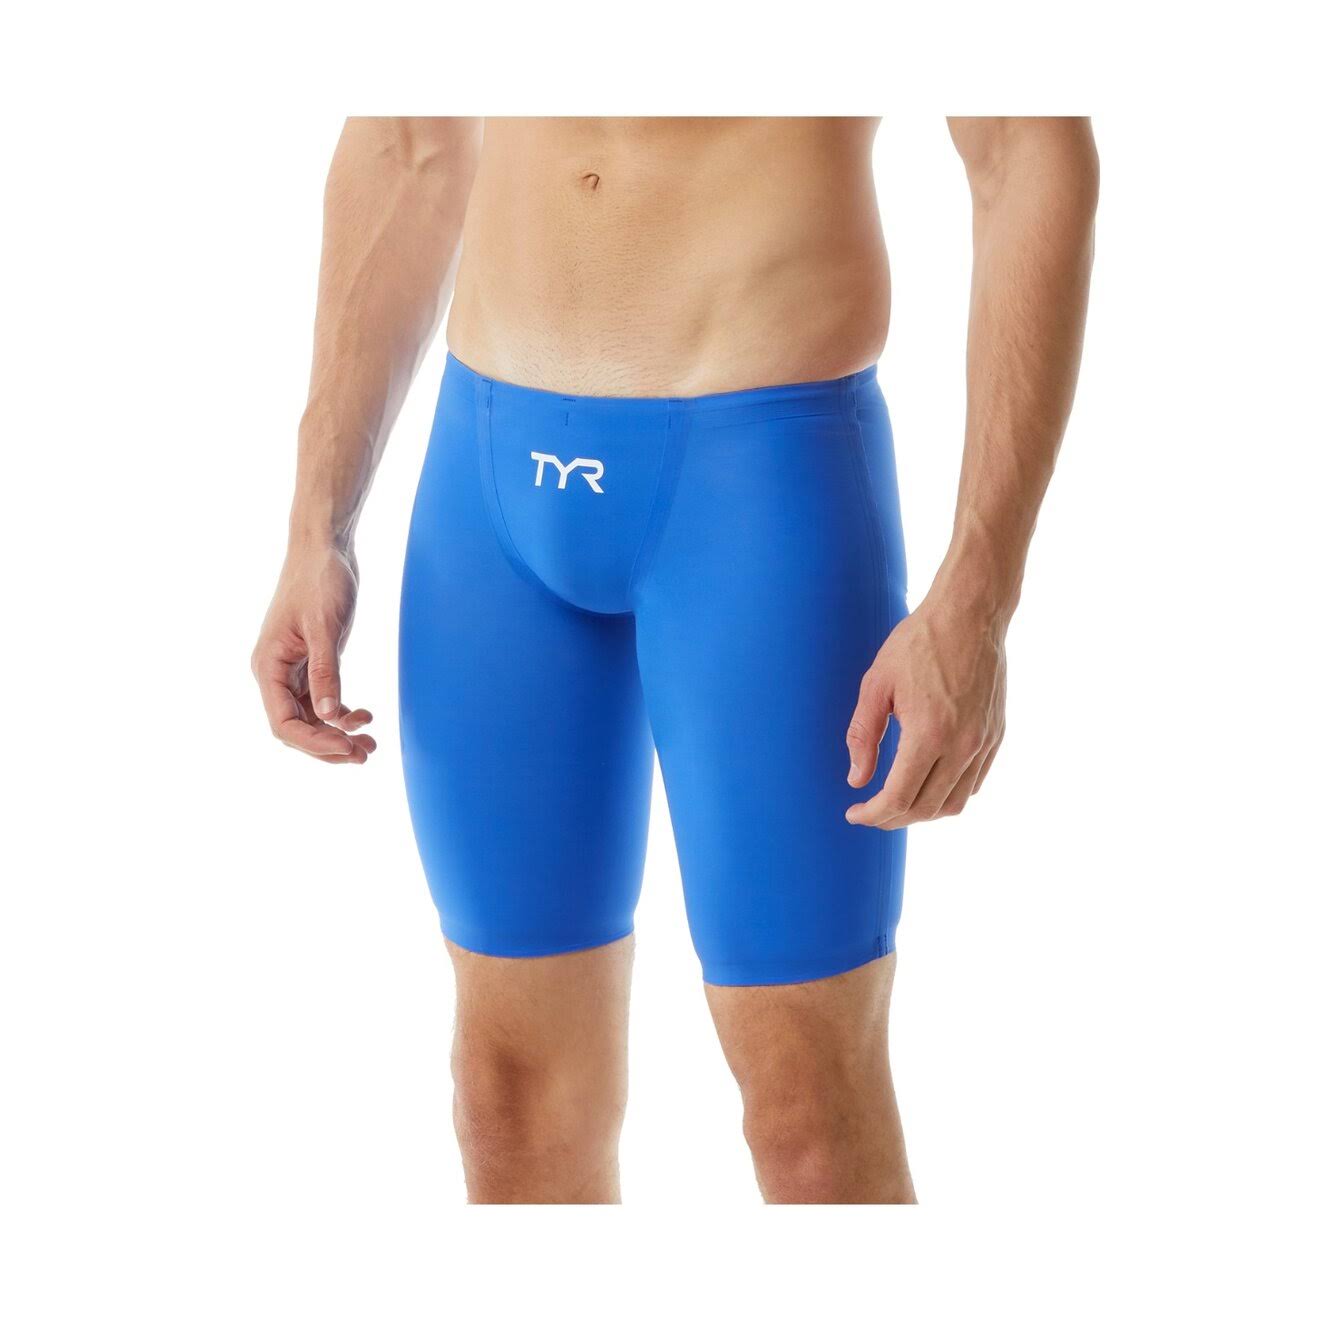 TYR Invictus Solid Jammer Blue - 28